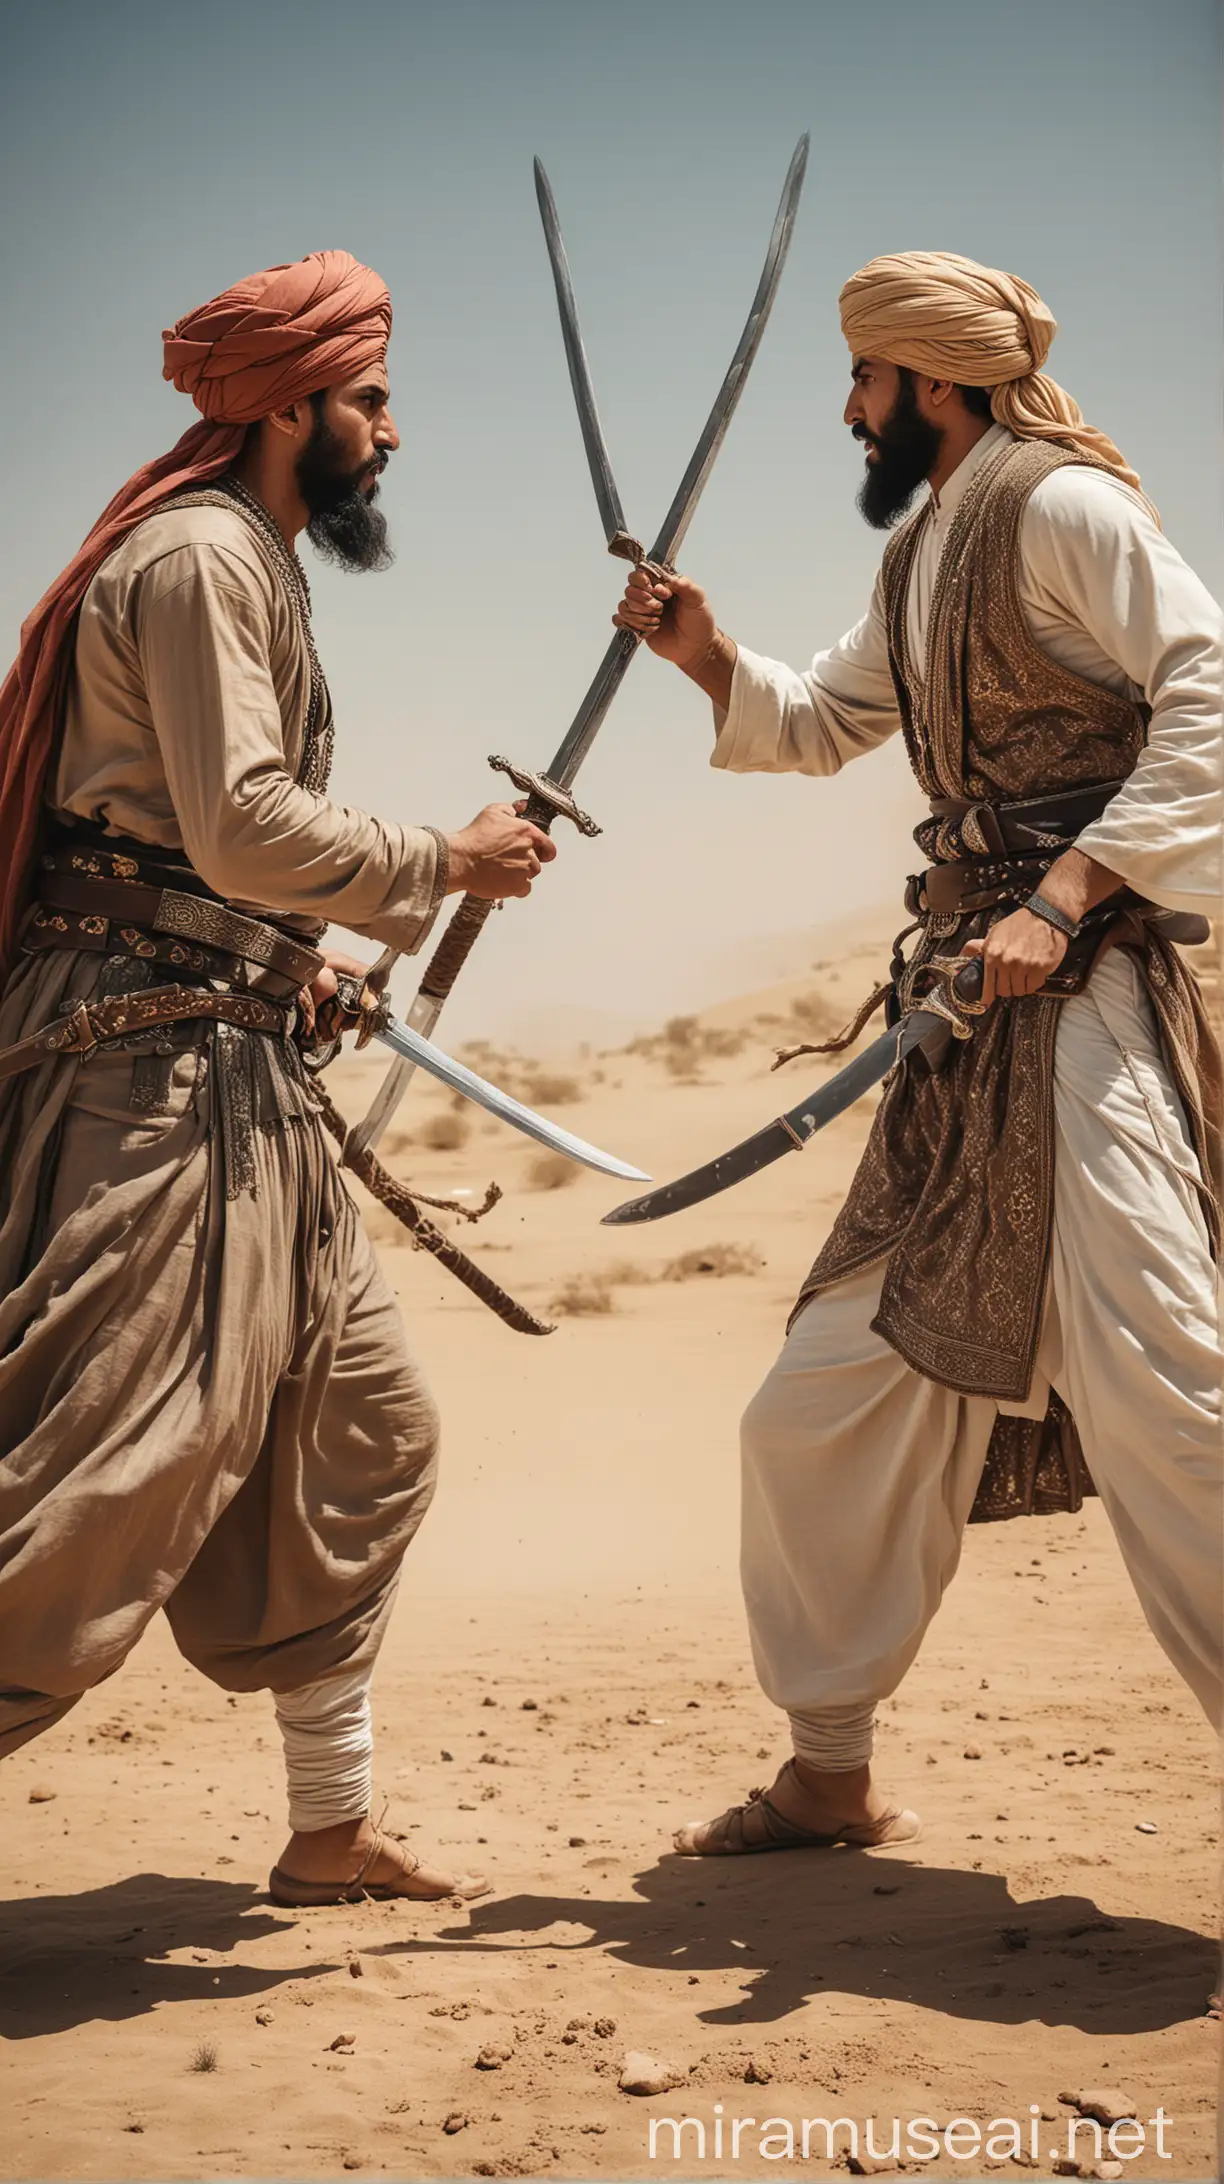 Two men fighting with each other, similar to each other in the mirror, holding swords in their hands like in a battlefield, wearing Arabic turbans and long Arab dresses, styled like a painting.